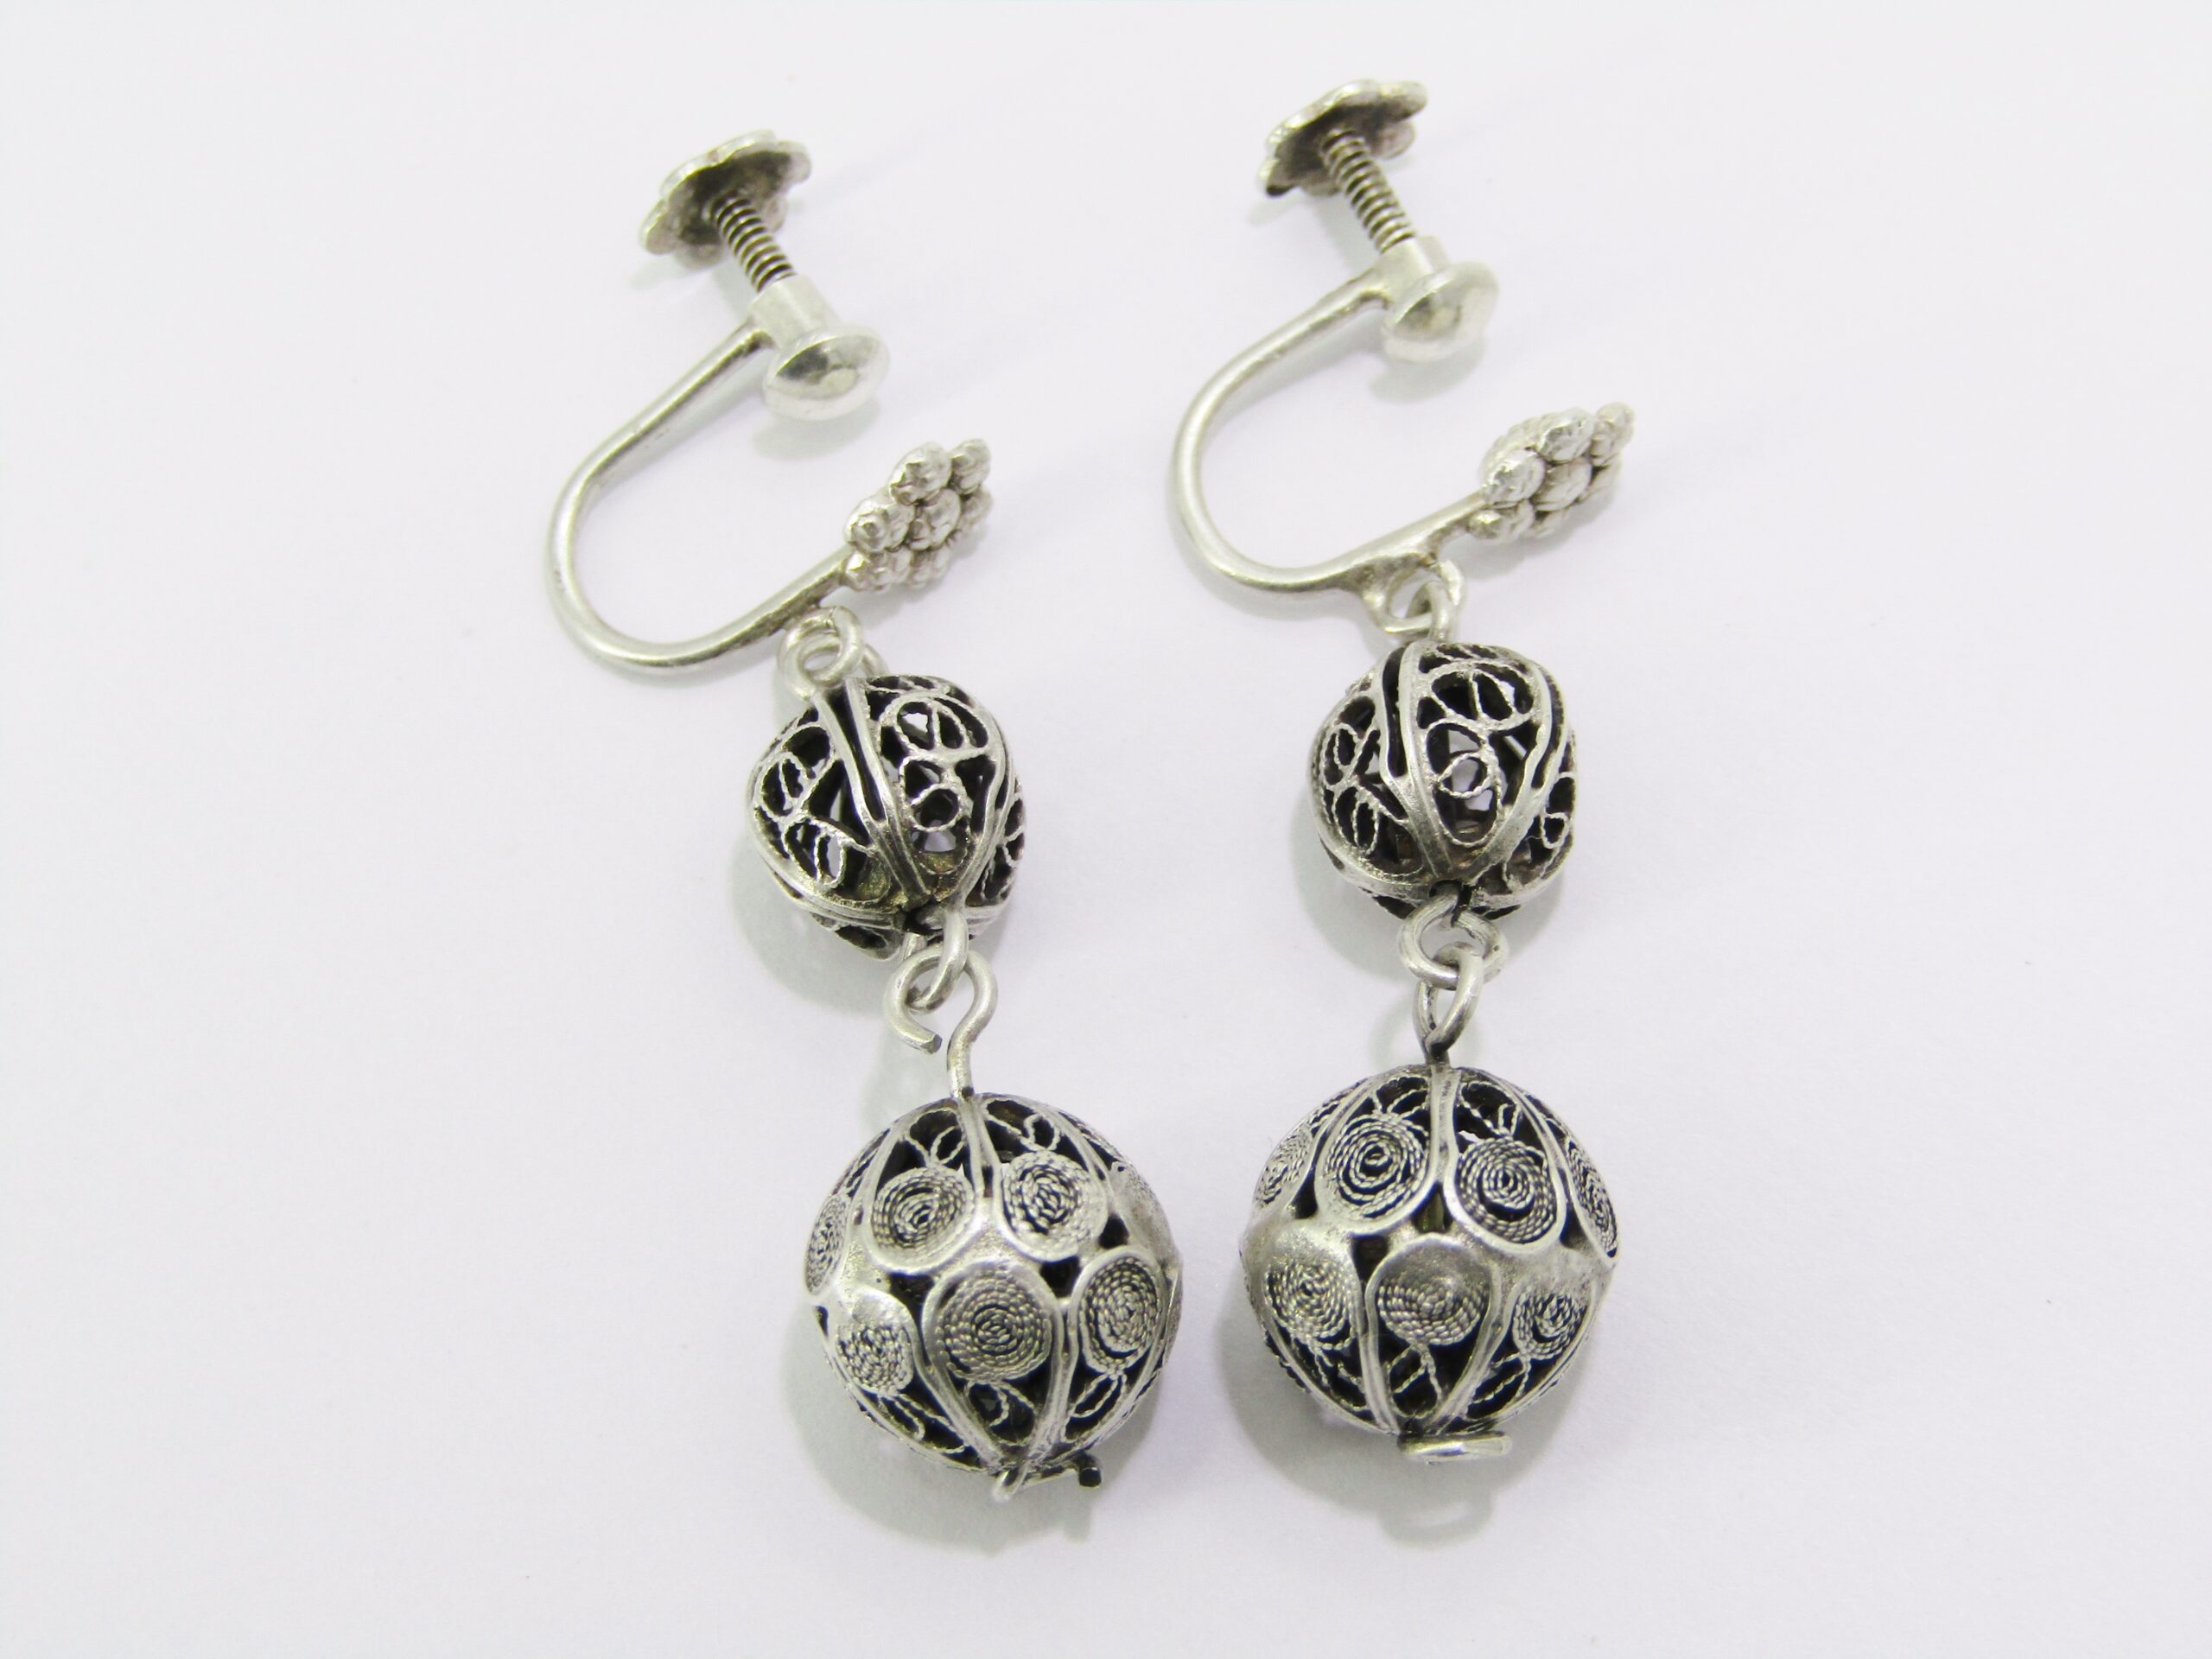 A Gorgeous Pair of Vintage Design Filigree Ball Earrings in Sterling Silver.